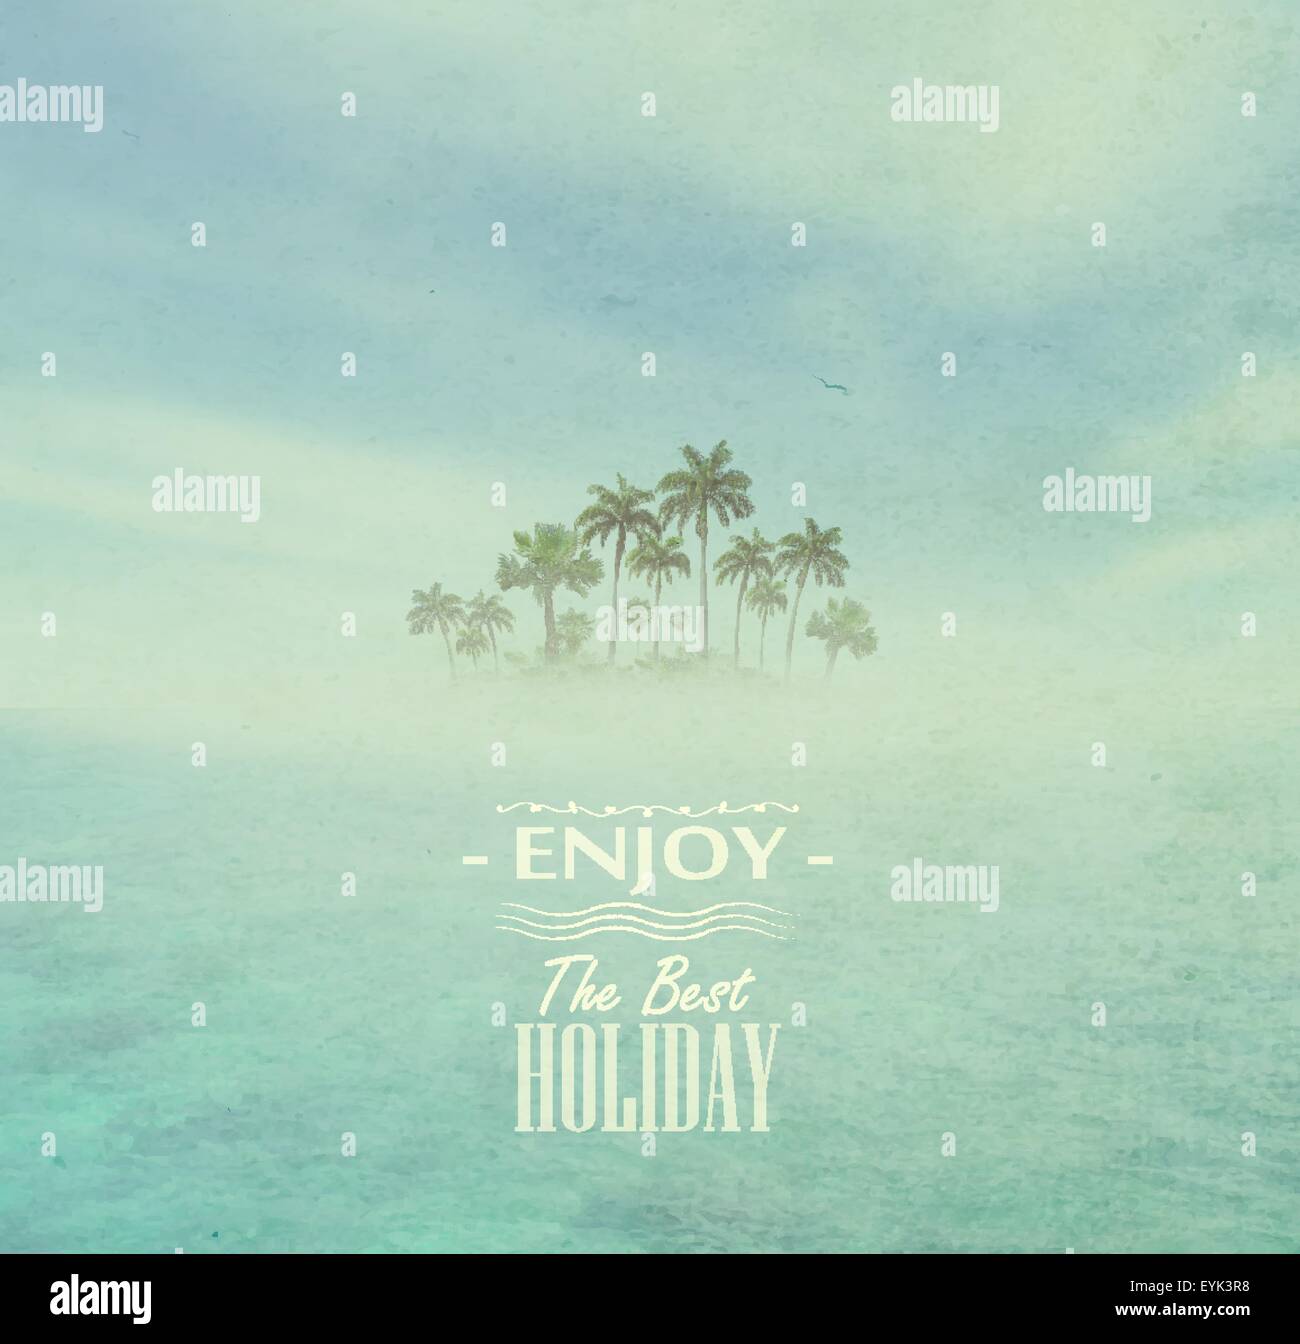 Dirty Background With Sky, Ocean, Tropical Island With Palms And Title Inscription Stock Vector